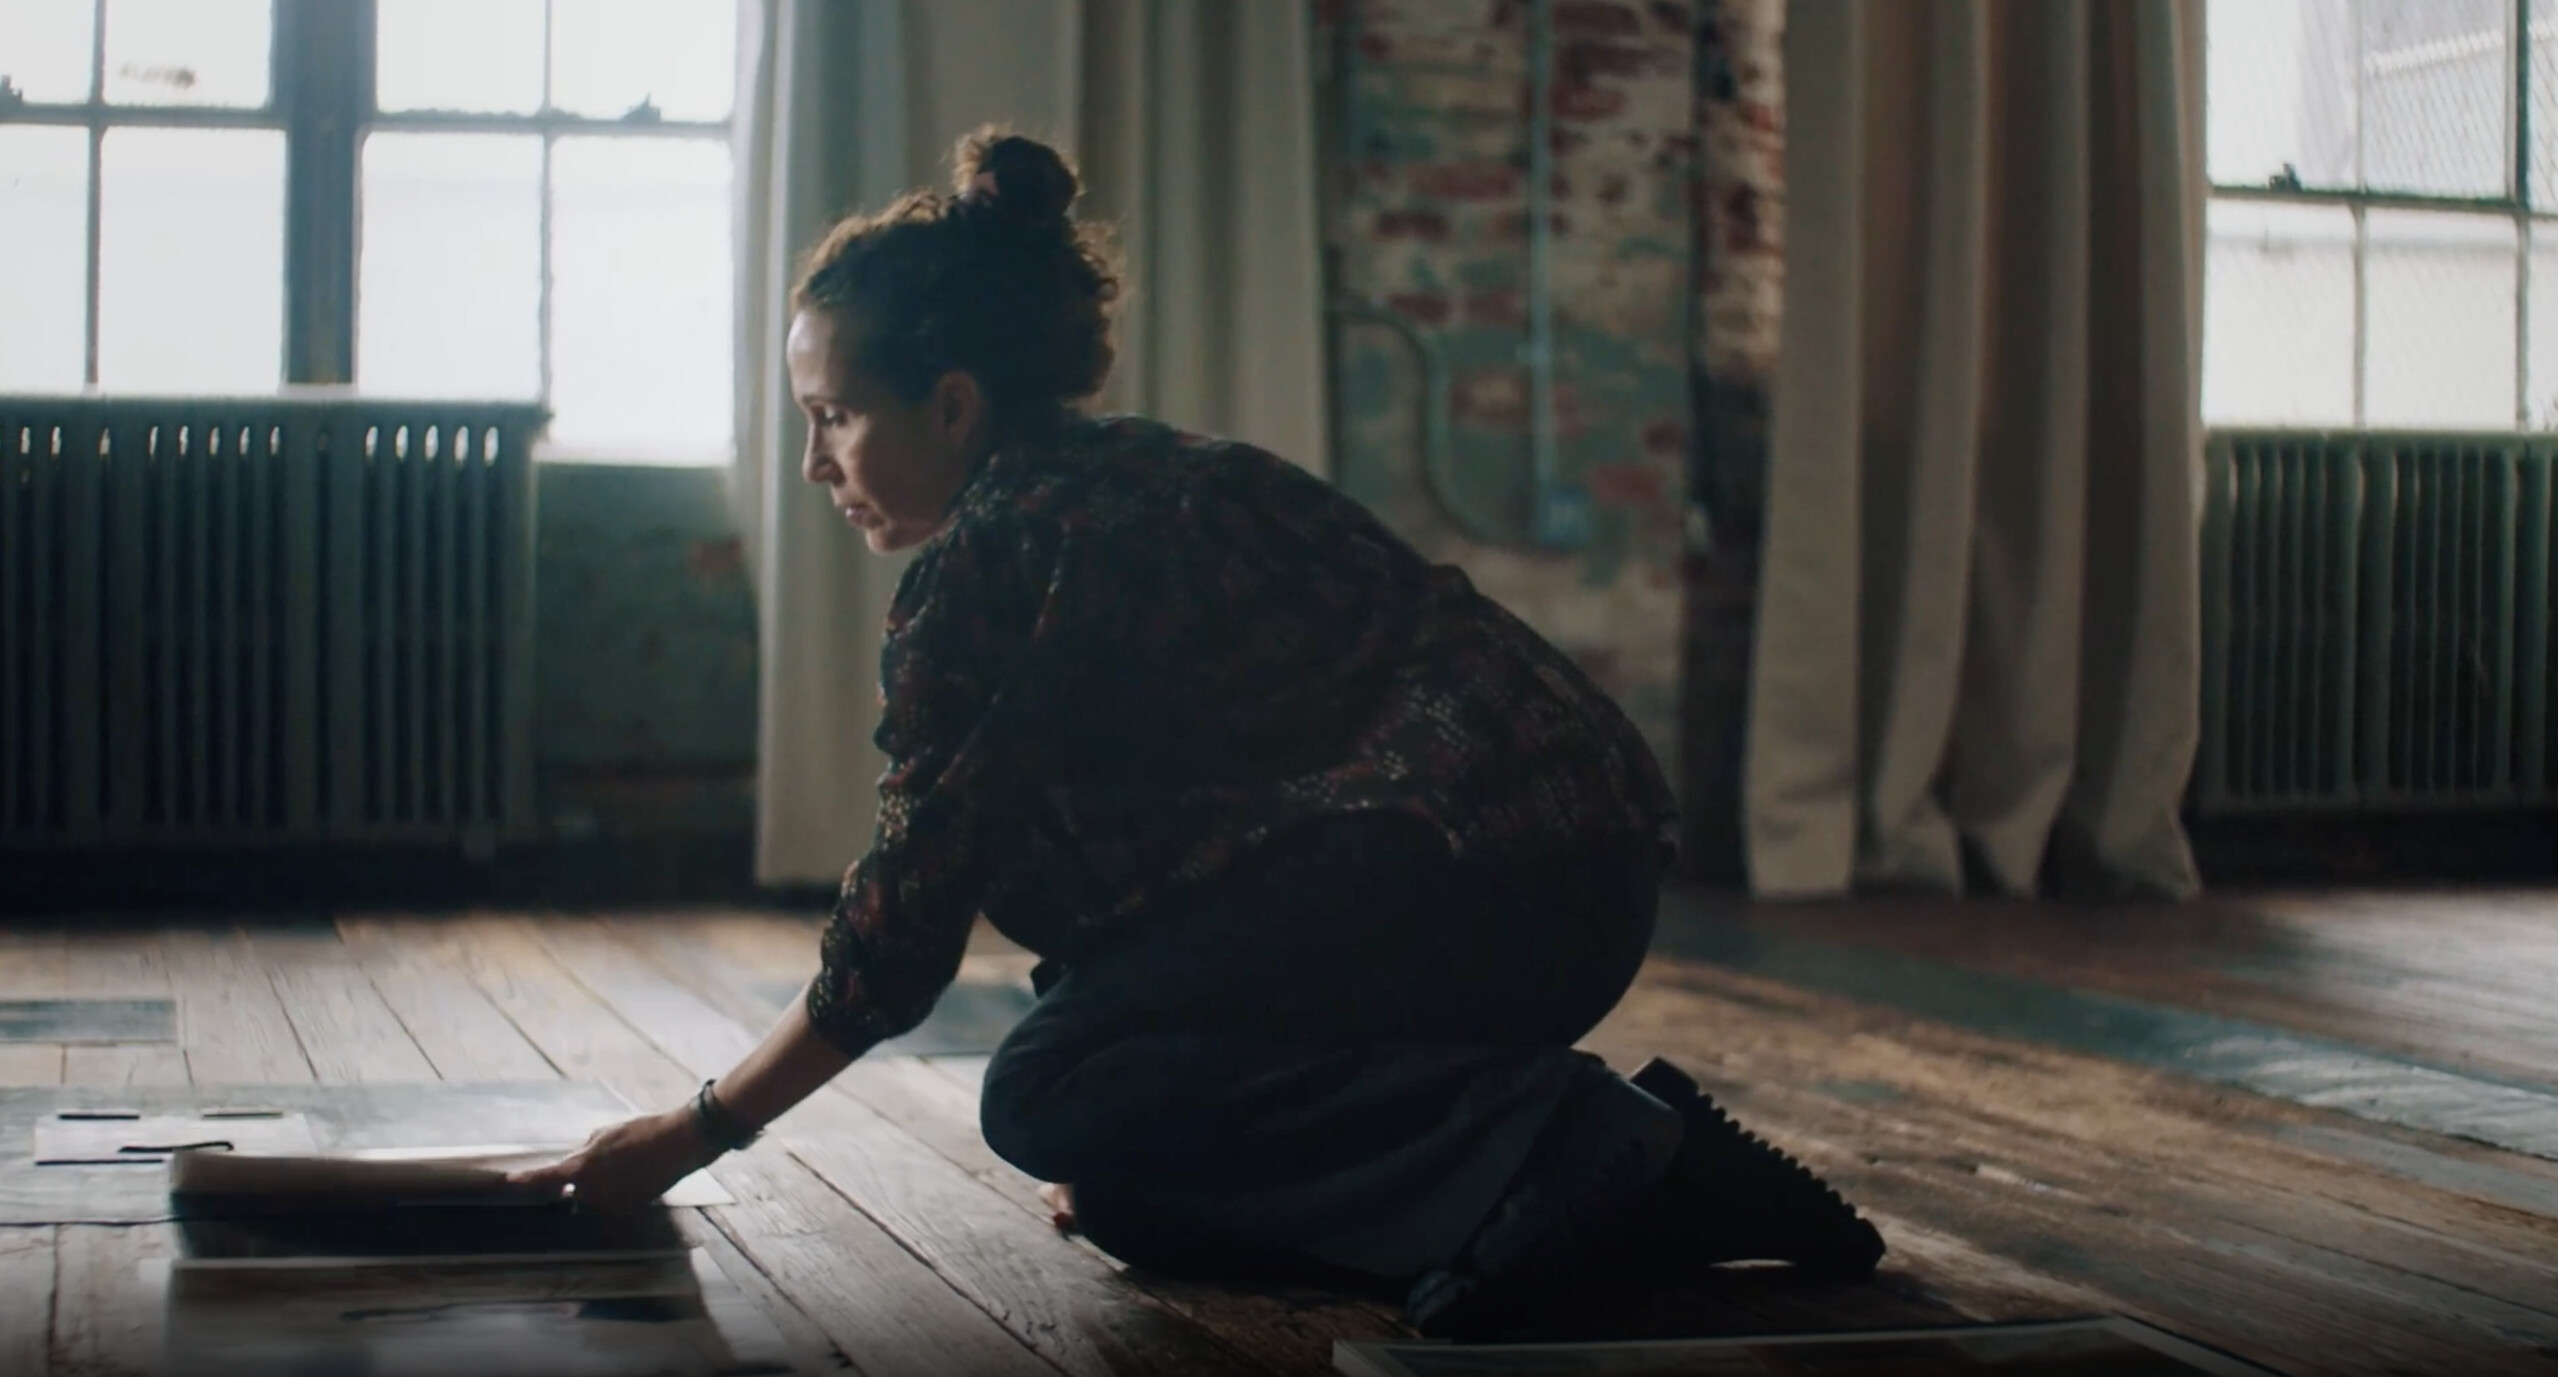 A woman with medium skin tone and a loose top-knot bun kneels on the floor leaning forward as she lays a photograph on the wooden floor. She is in a large room with big windows and exposed brick walls.